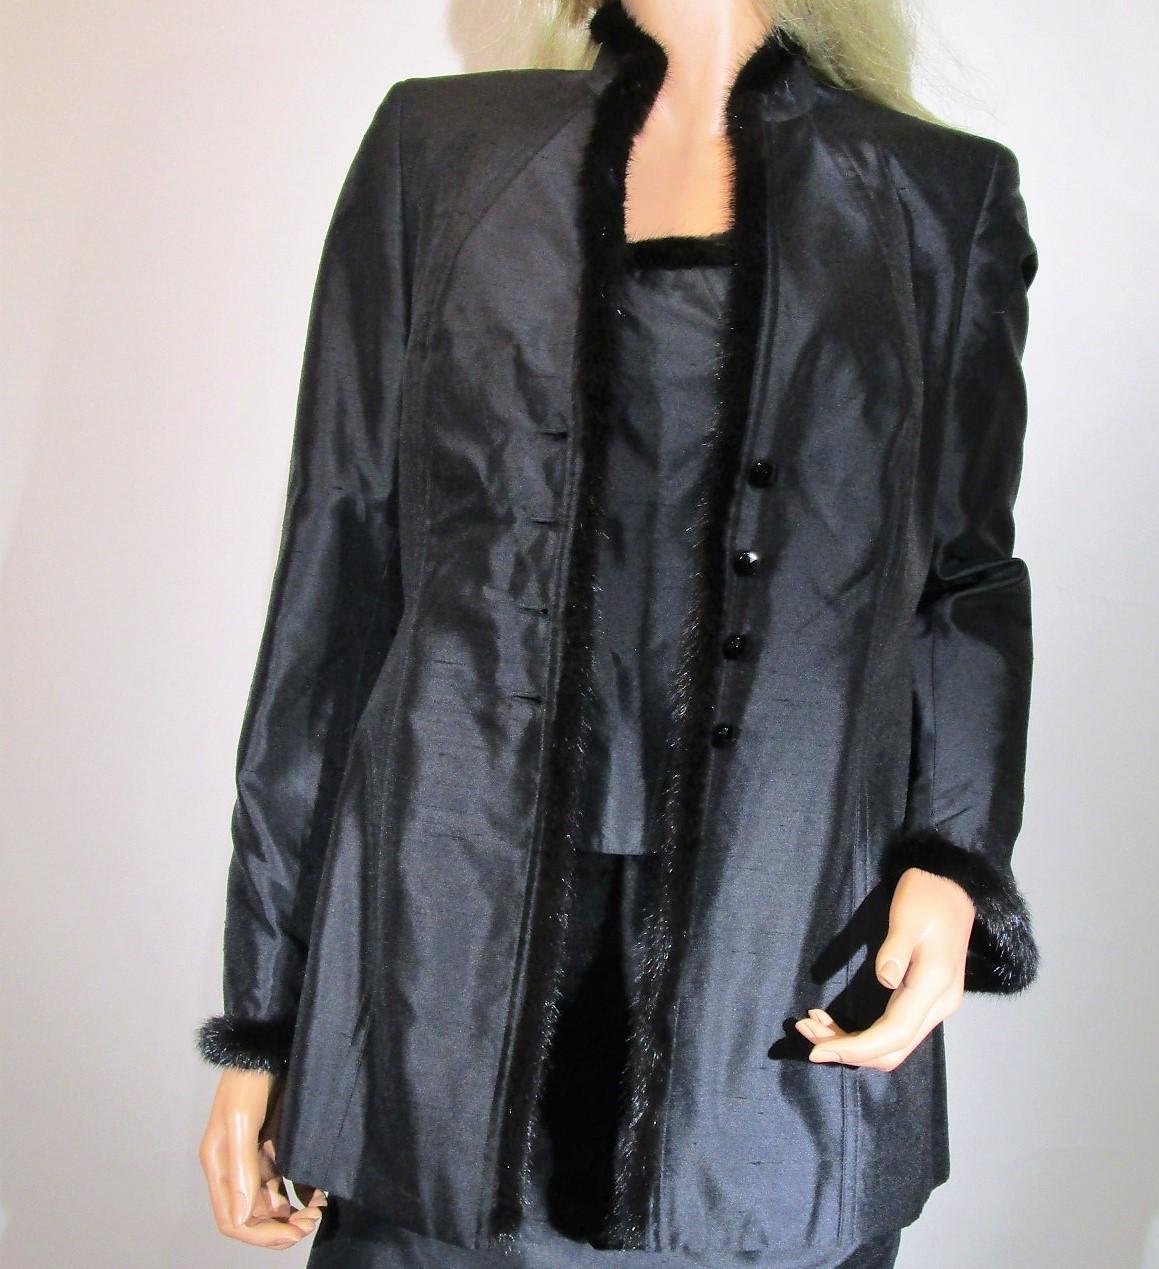 Vintage ESCADA Black Blazer, Skirt and Tank Top with amazing Black MINK trim detail on the blazer and top. 
Gorgeous classic design and made in Germany.
Outfit is in mint condition with no stains, holes or snags.

Details:
*Size 36 or USA Size 6 -